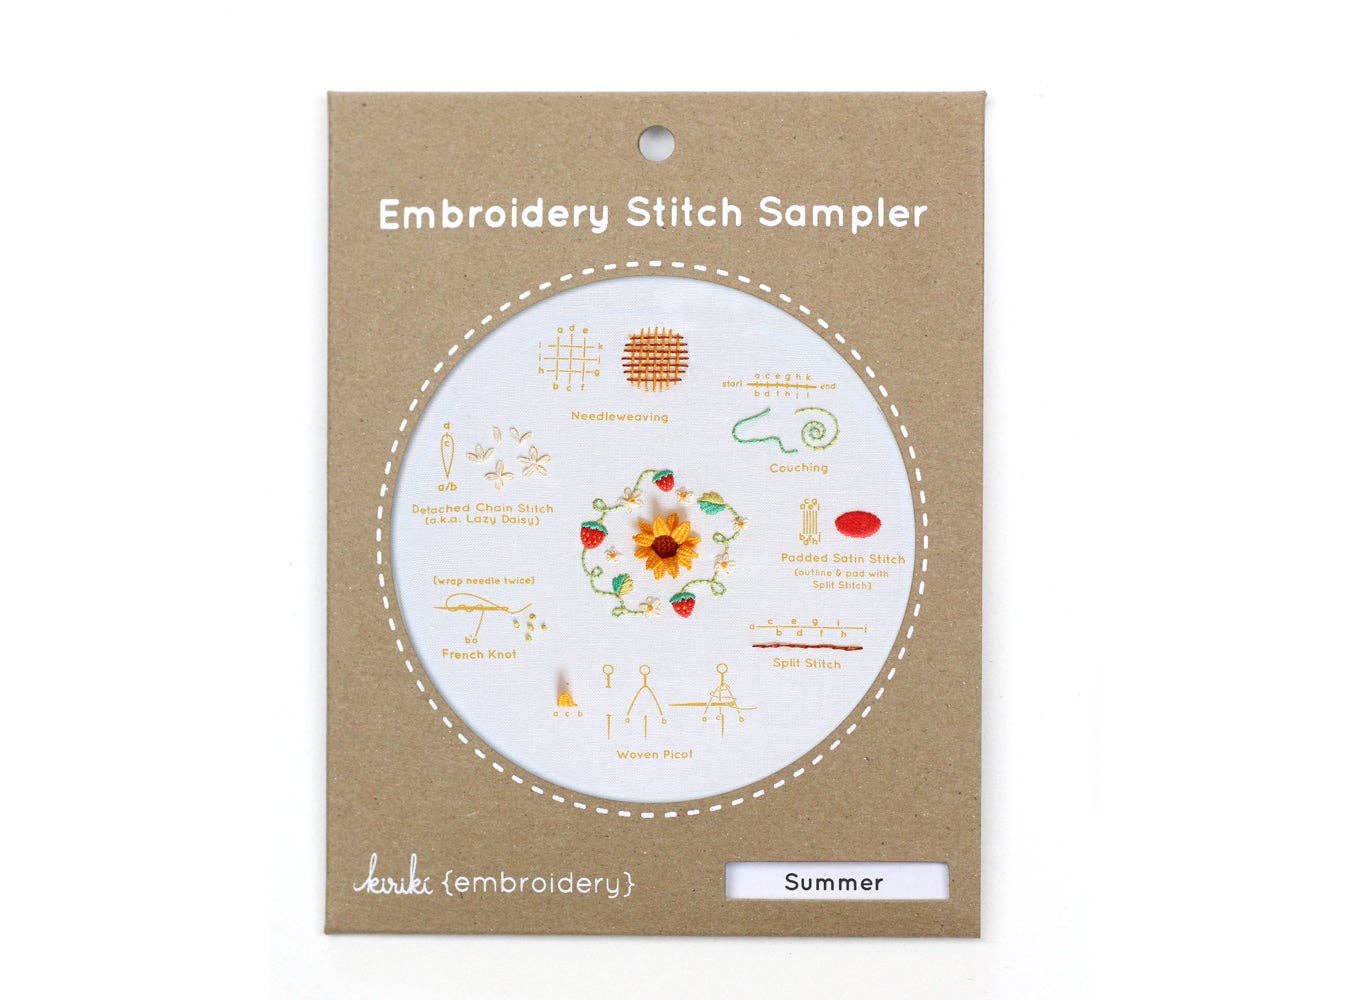 Summer Embroidery Kit - homesewn